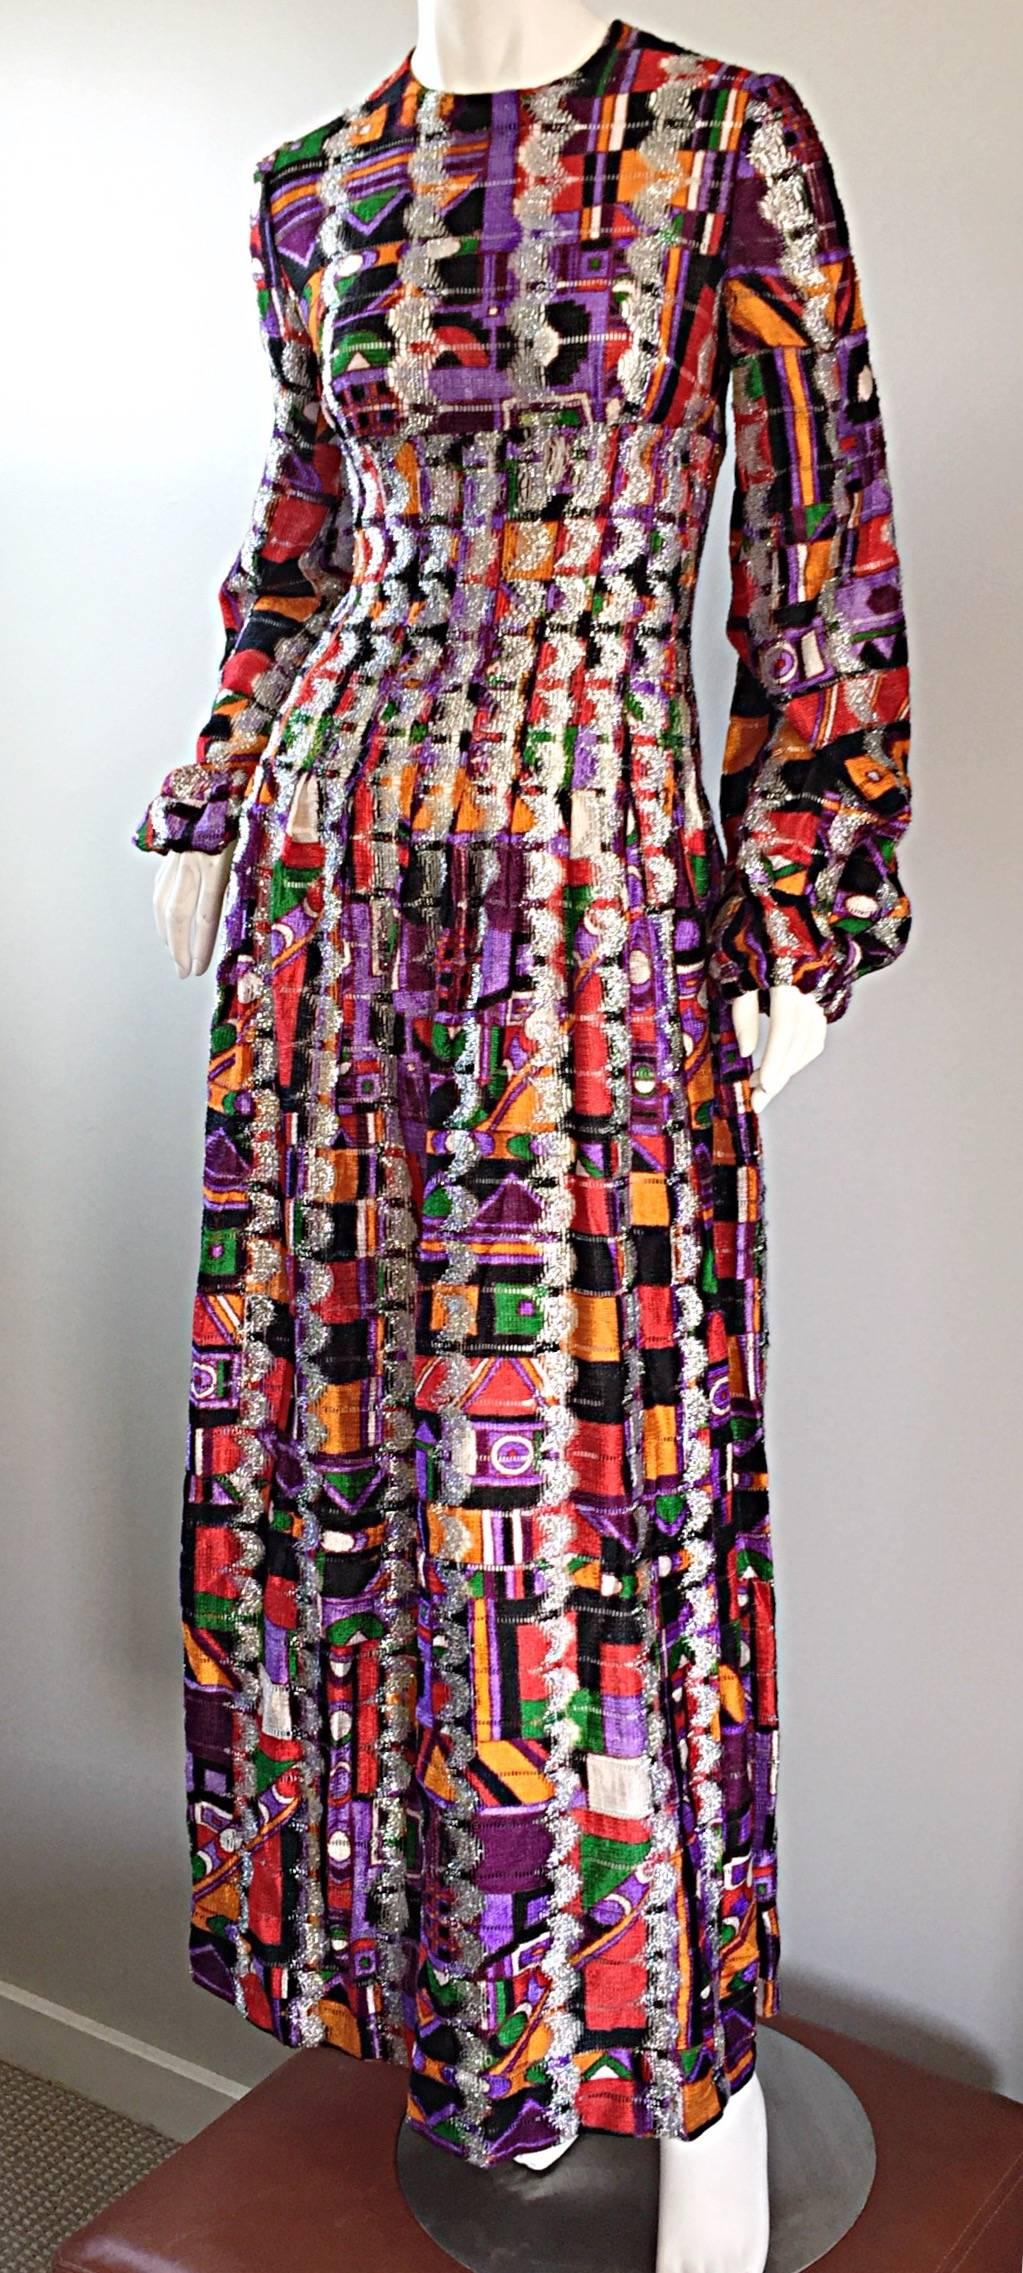 Amazing AND Rare vintage Pierre Cardin colorful Bohemian knit dress! Kaleidoscope open-weave print, with silver metallic silk threading throughout. Chic billow sleeves, with elastic cuffs. Quite possibly my favorite Cardin piece EVER! Can easily be